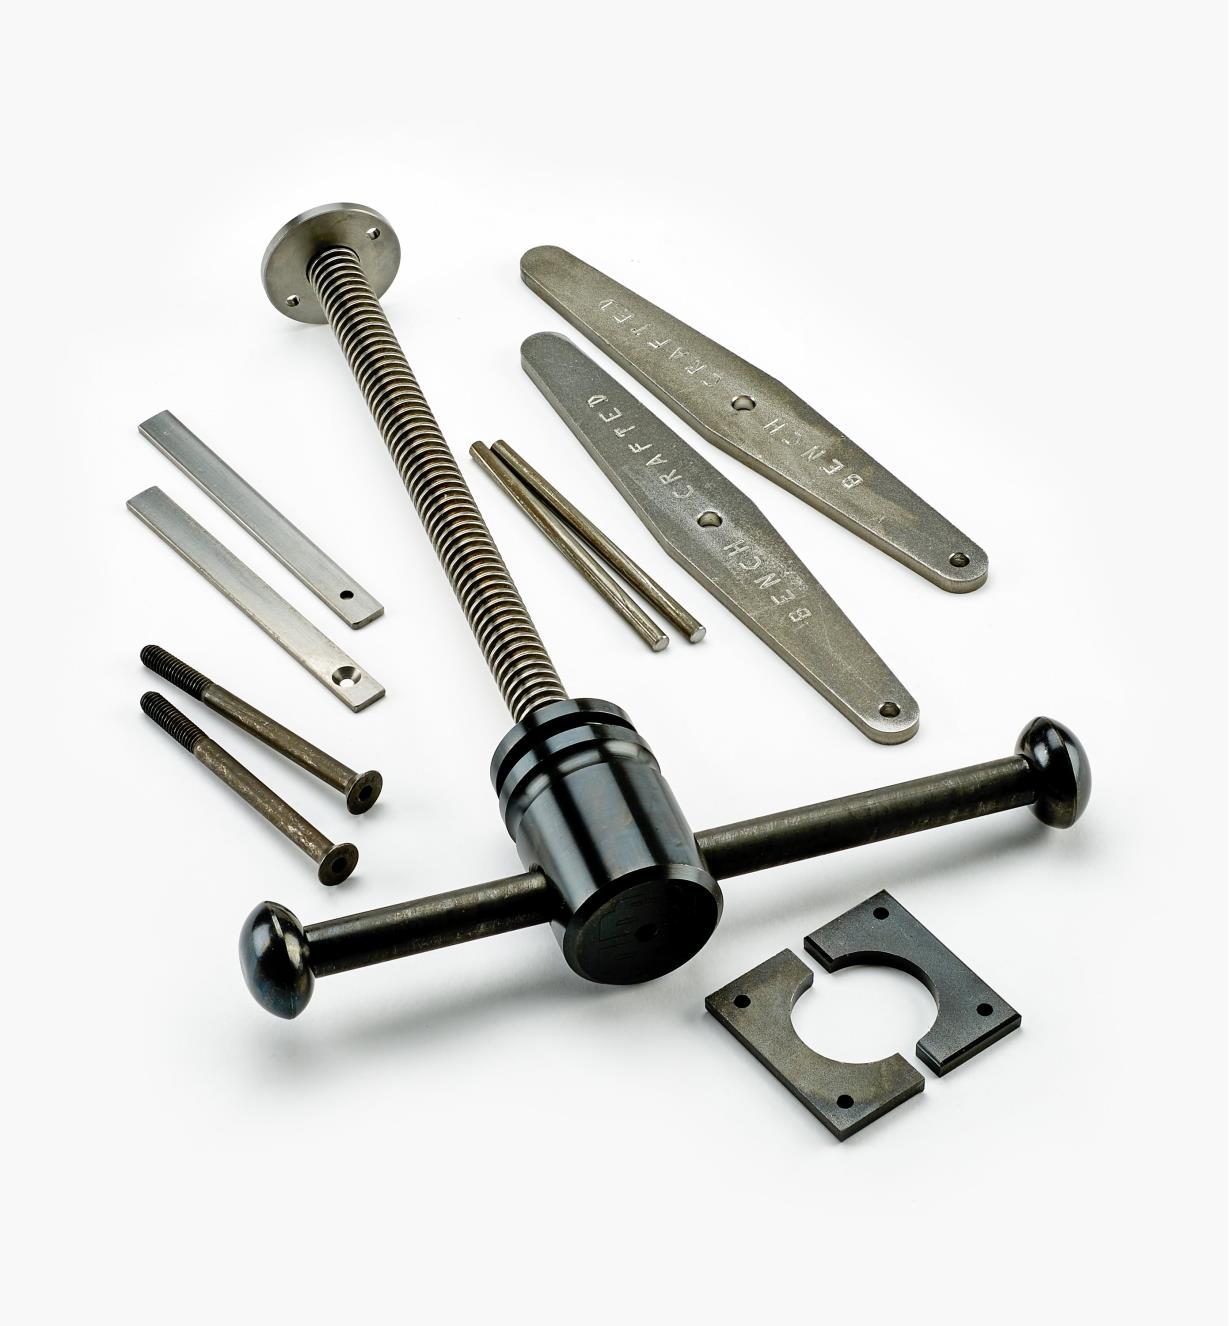 06G0145 - Benchcrafted HiVise Kit